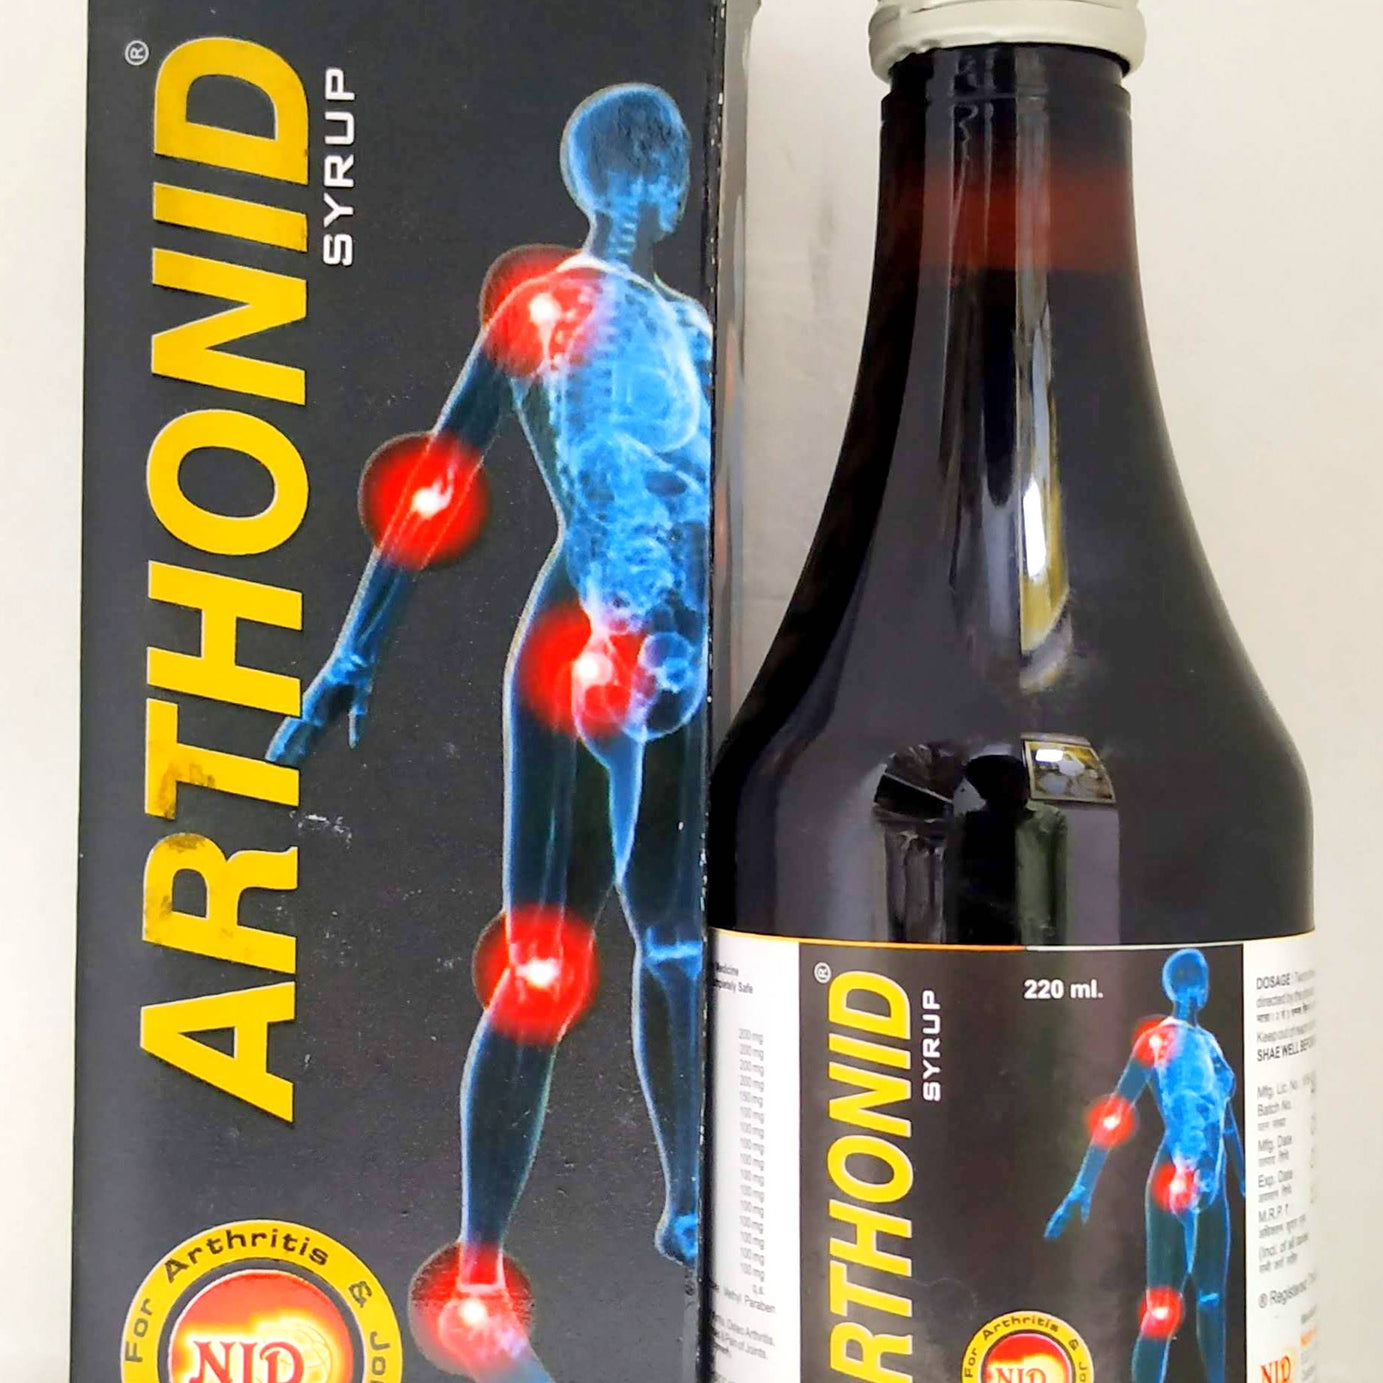 Shop Arthonid Syrup 220ml at price 110.00 from North India Online - Ayush Care